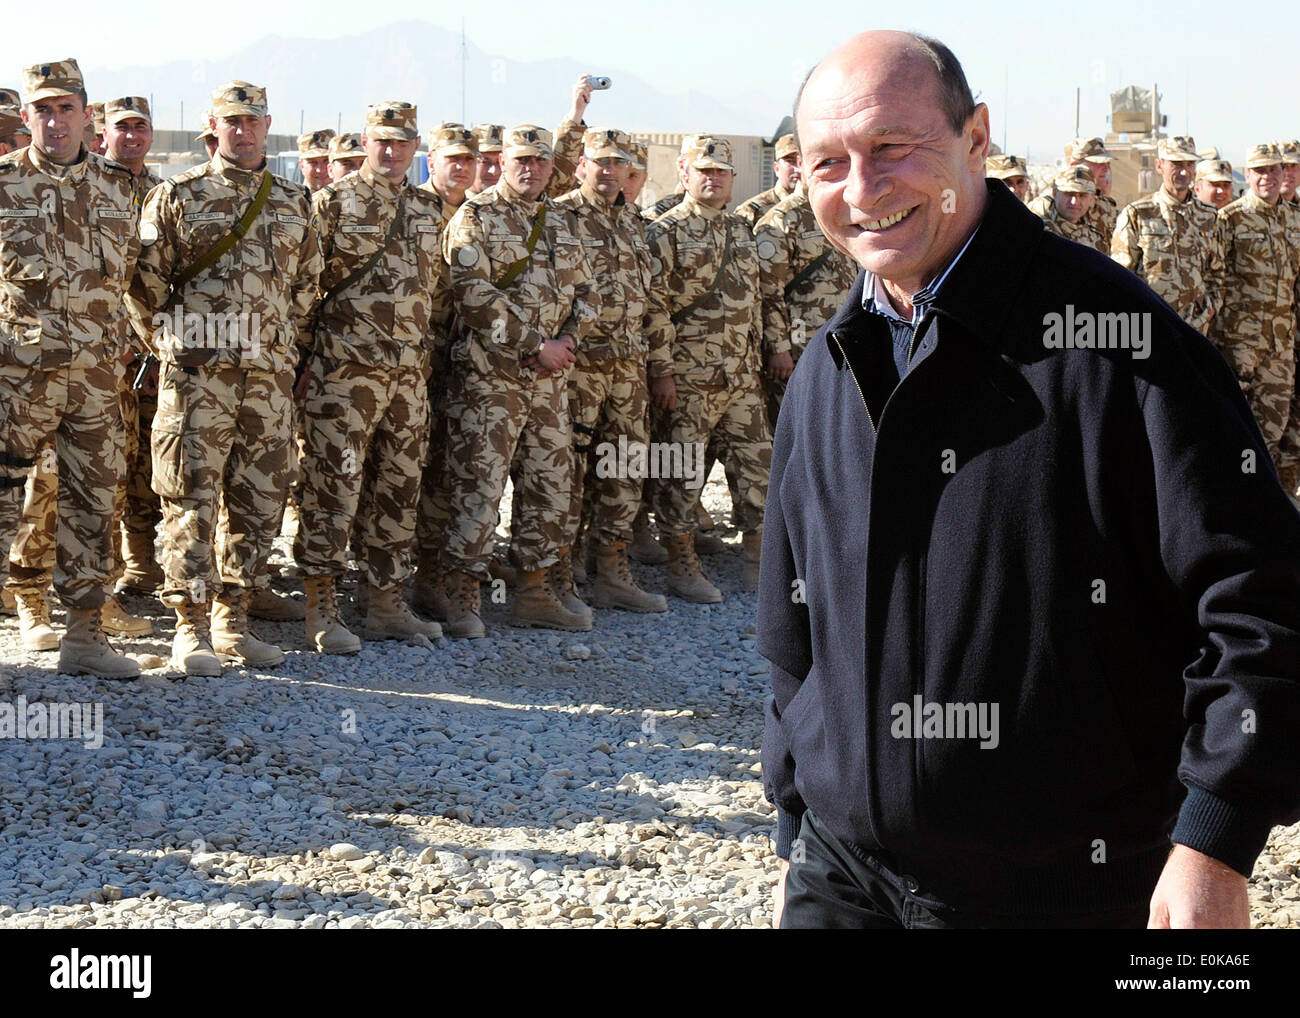 Romanian President Traian Basescu meets today with Romanian soldiers at Forward Operating Base Apache near Qalat in the Zabul p Stock Photo